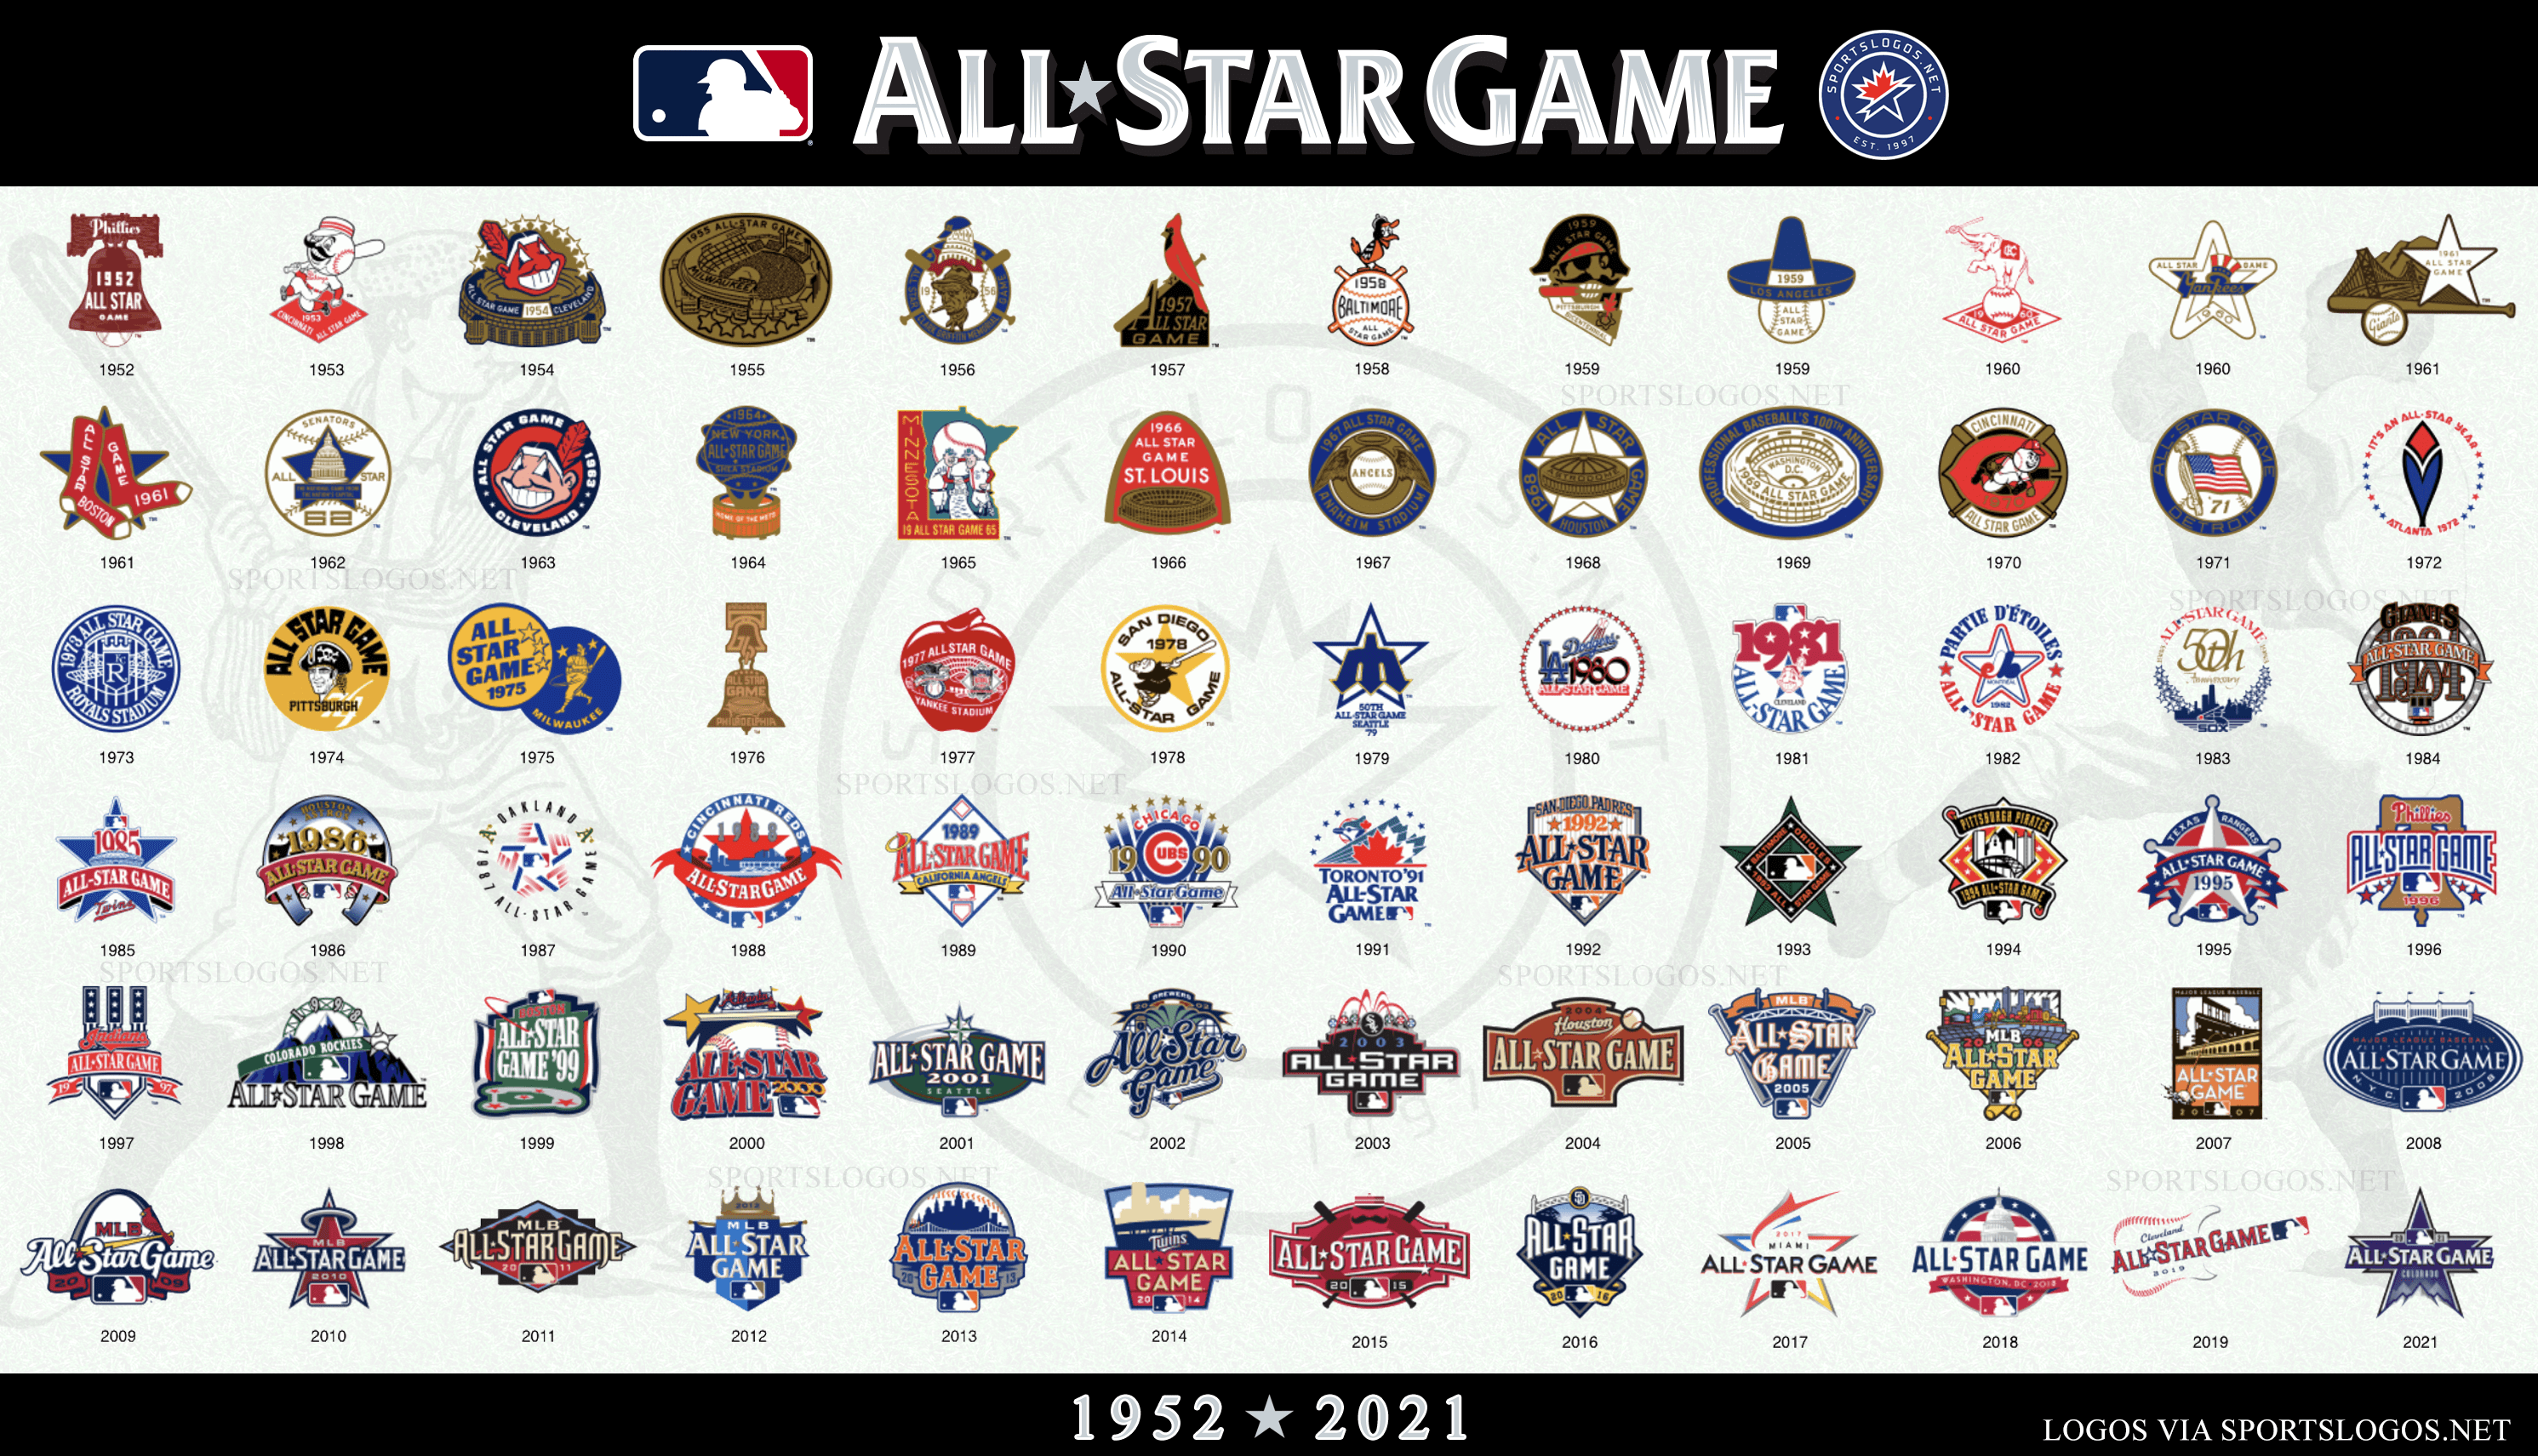 I. Introduction to the MLB All-Star Game